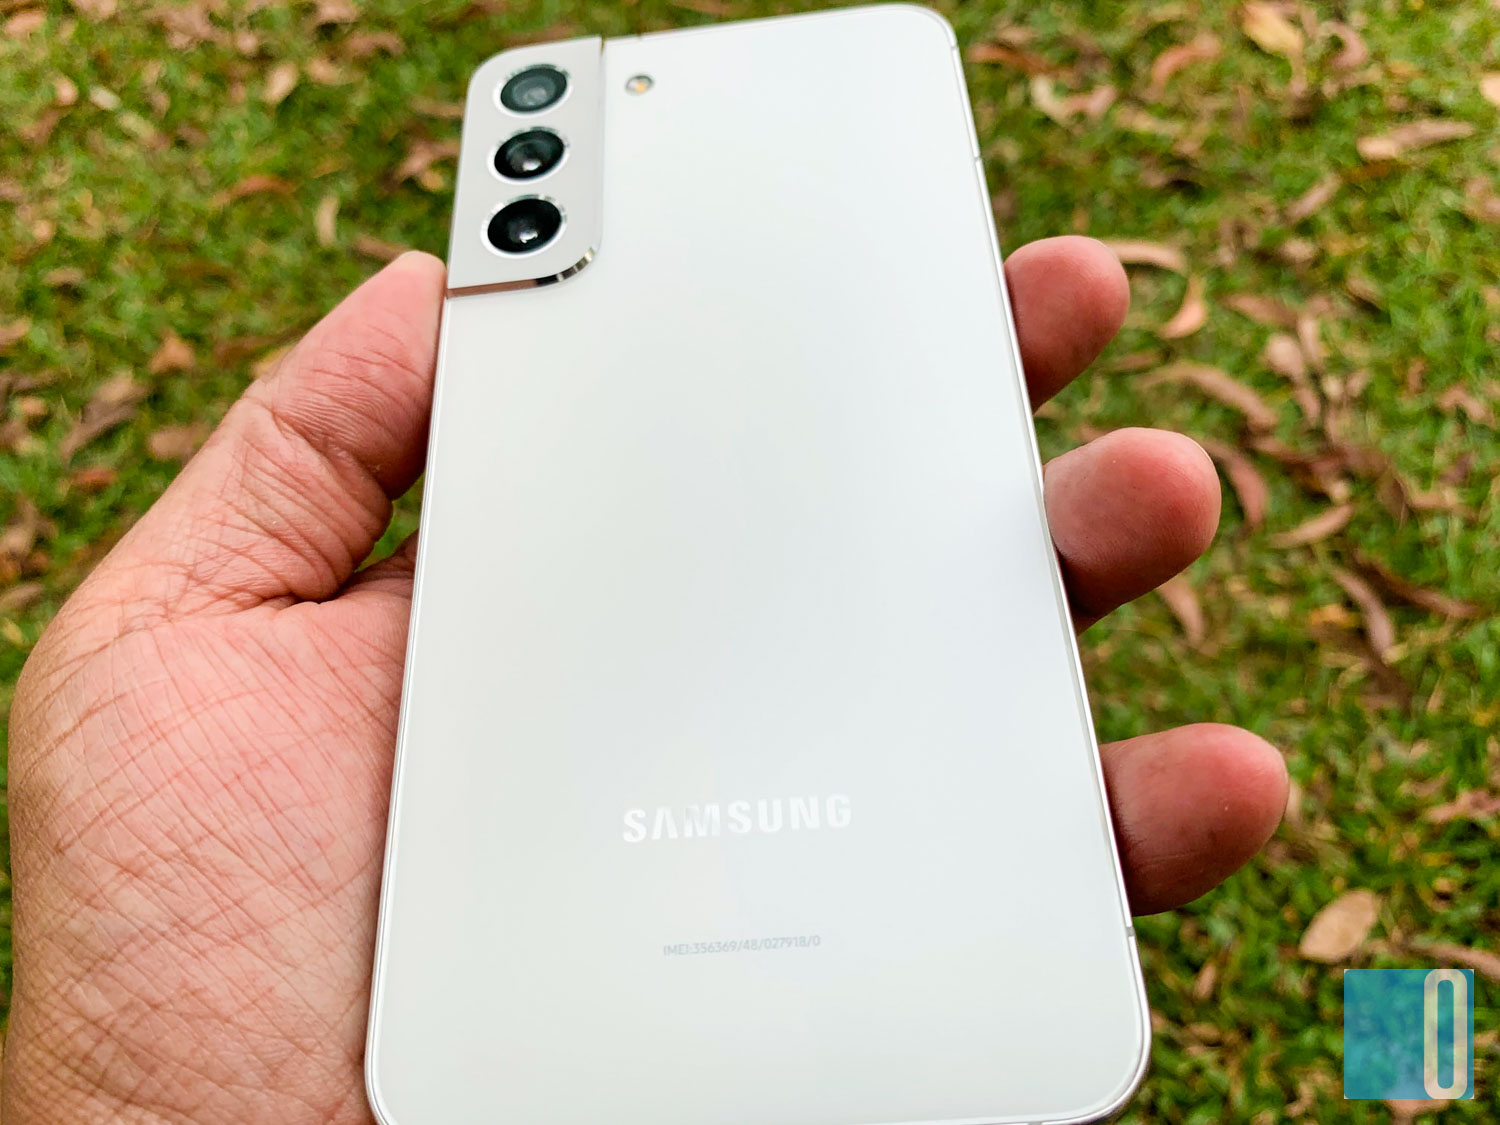 Samsung Galaxy S22 Plus Review